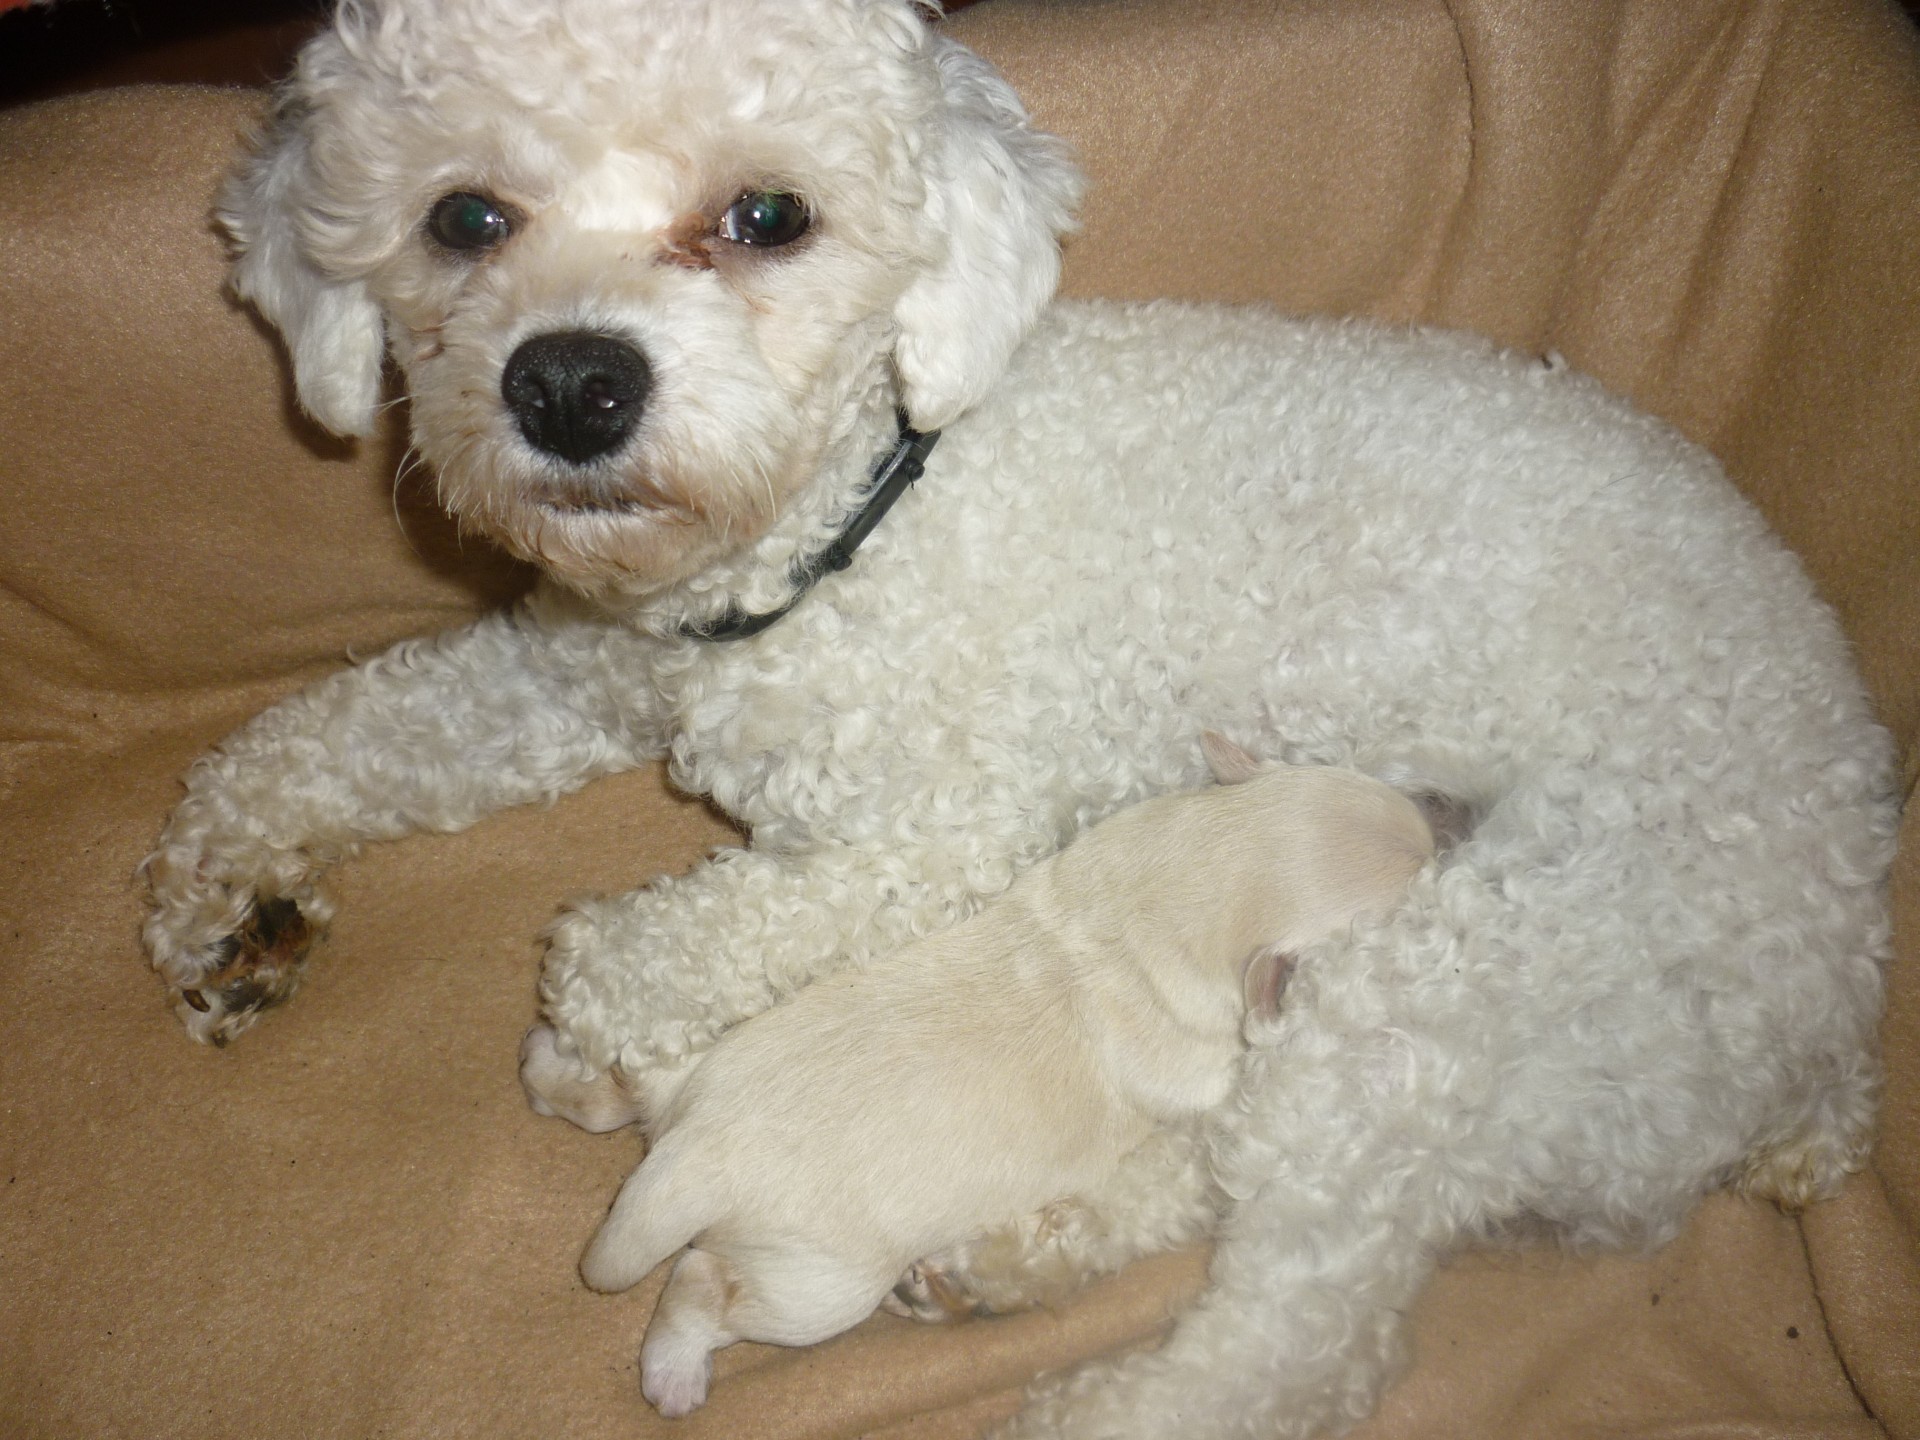 Toy poodle dog with her new puppy